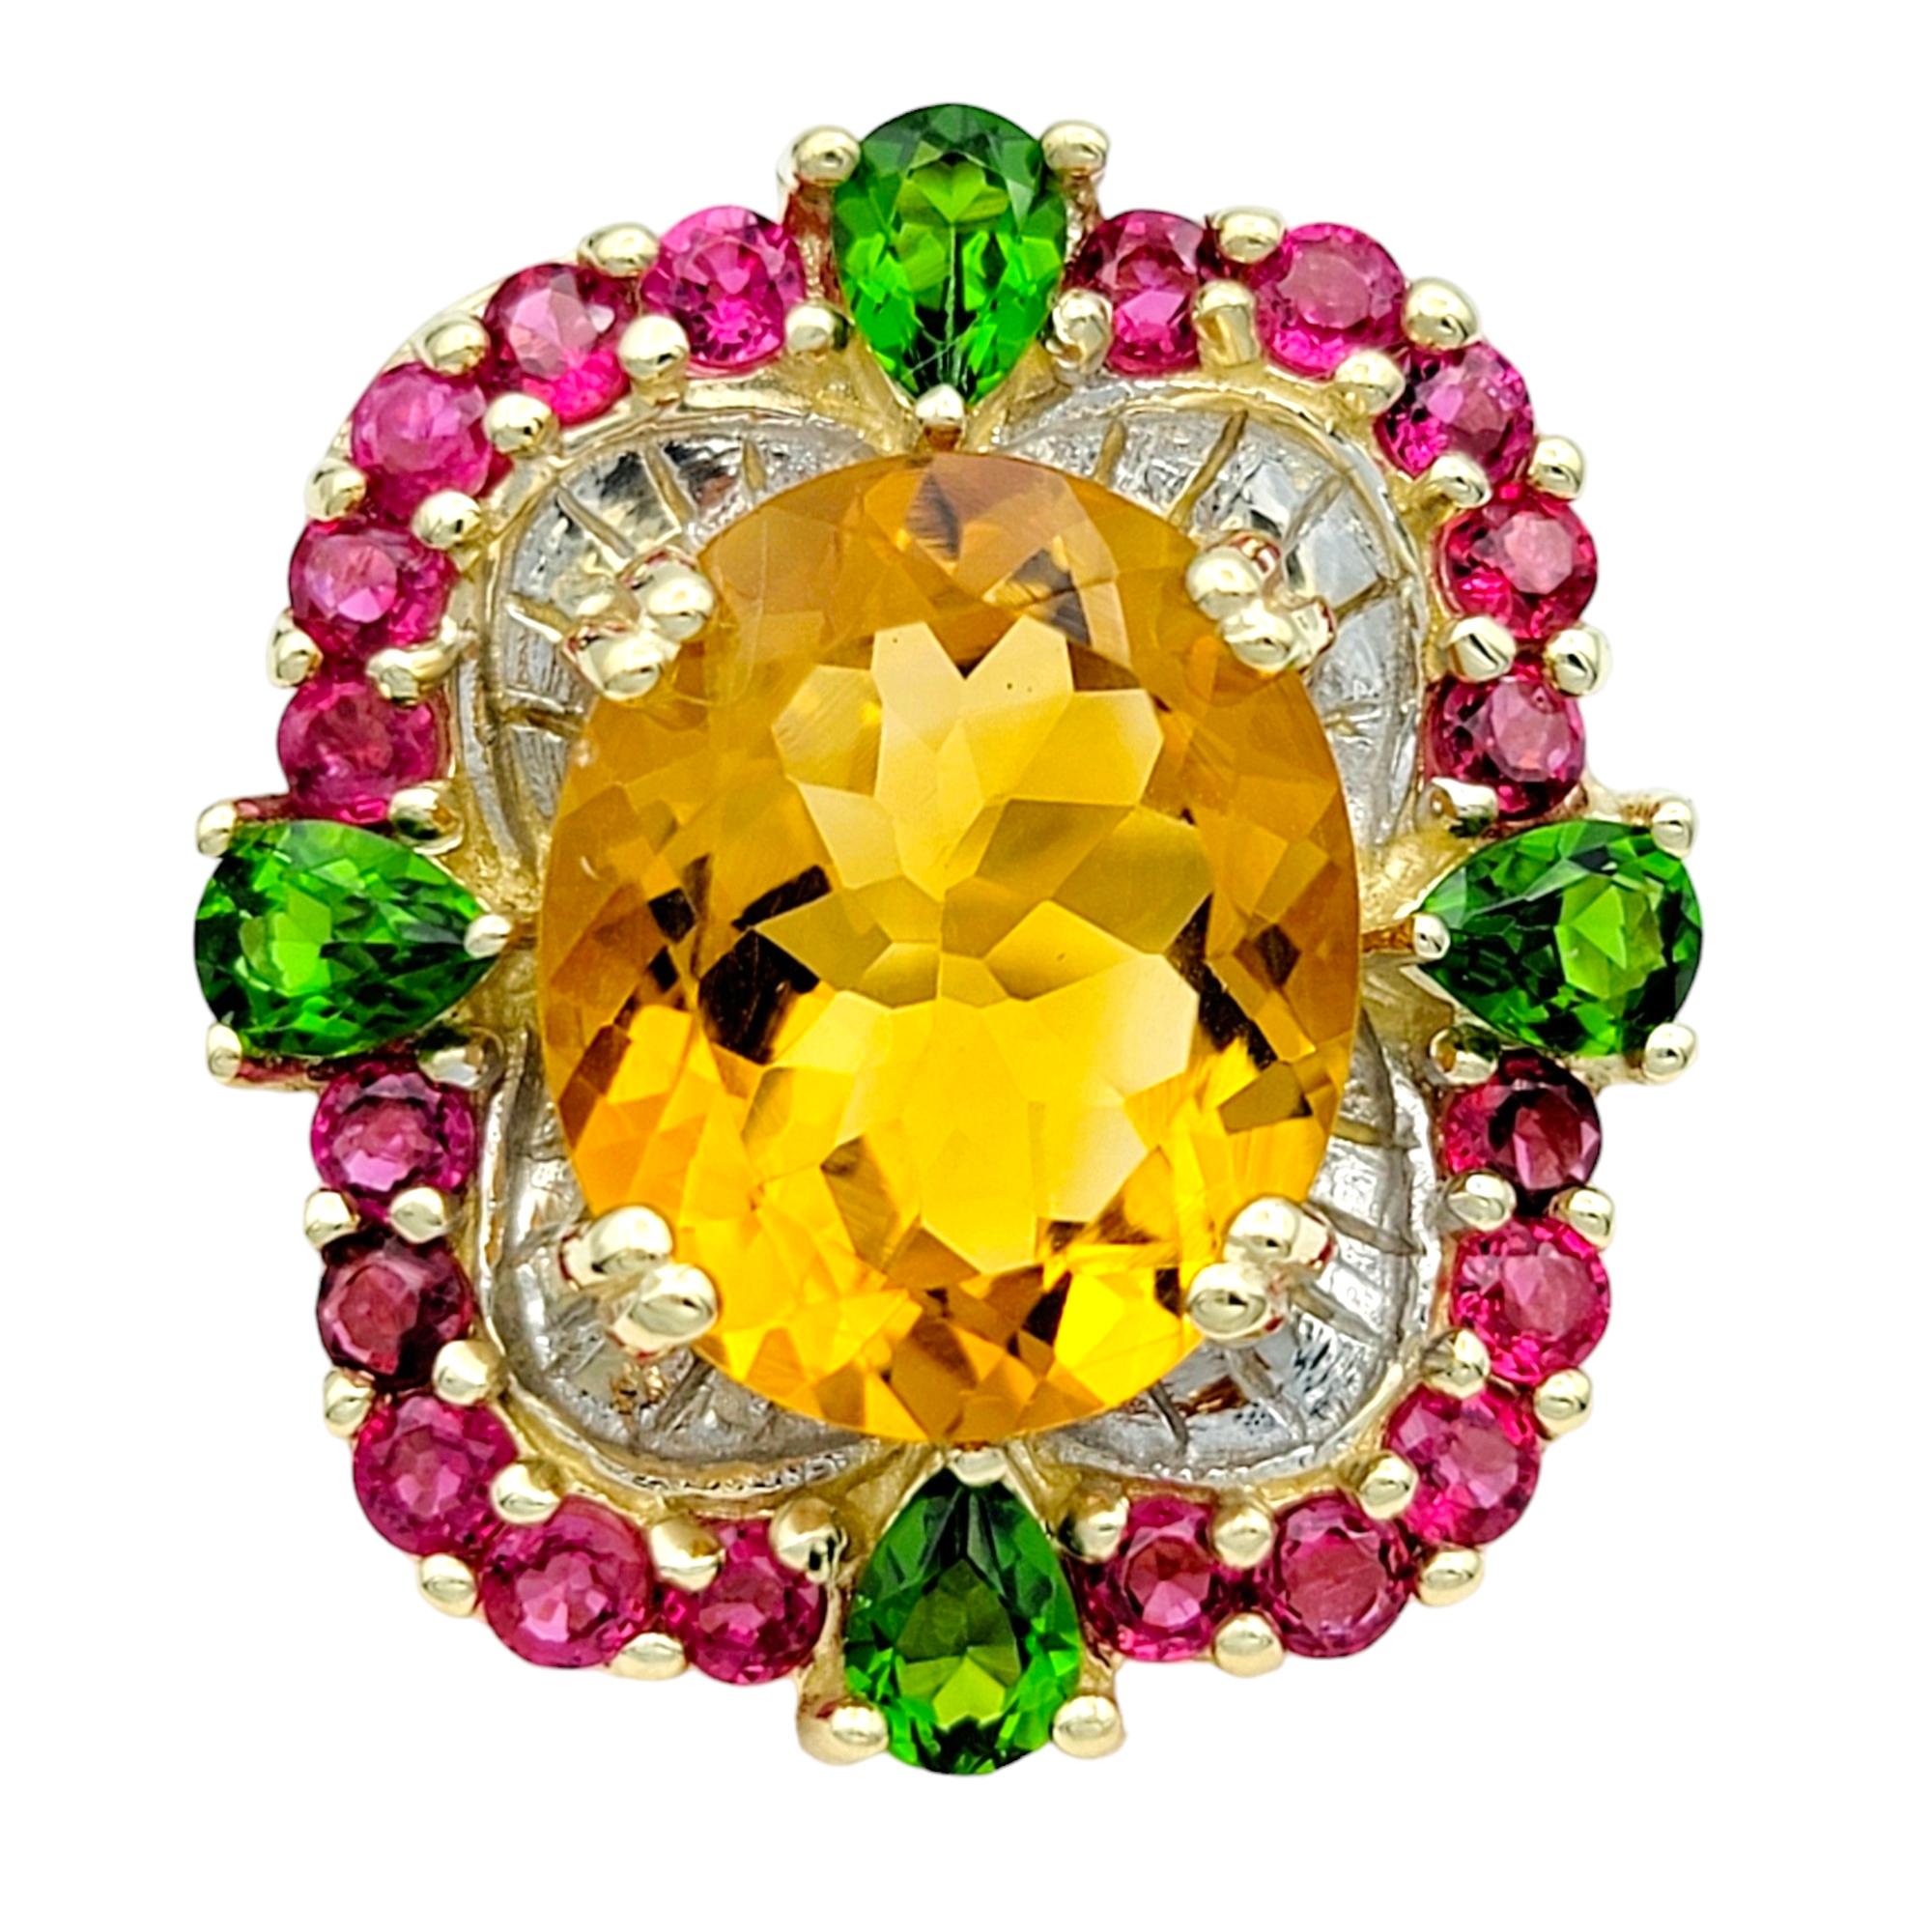 Ring Size: 6.5

This stunning ring showcases a vibrant blend of gemstones set in 14 karat yellow gold, creating a captivating and colorful design. At its center is a large oval citrine, radiating warmth and brilliance. Surrounding the citrine is a